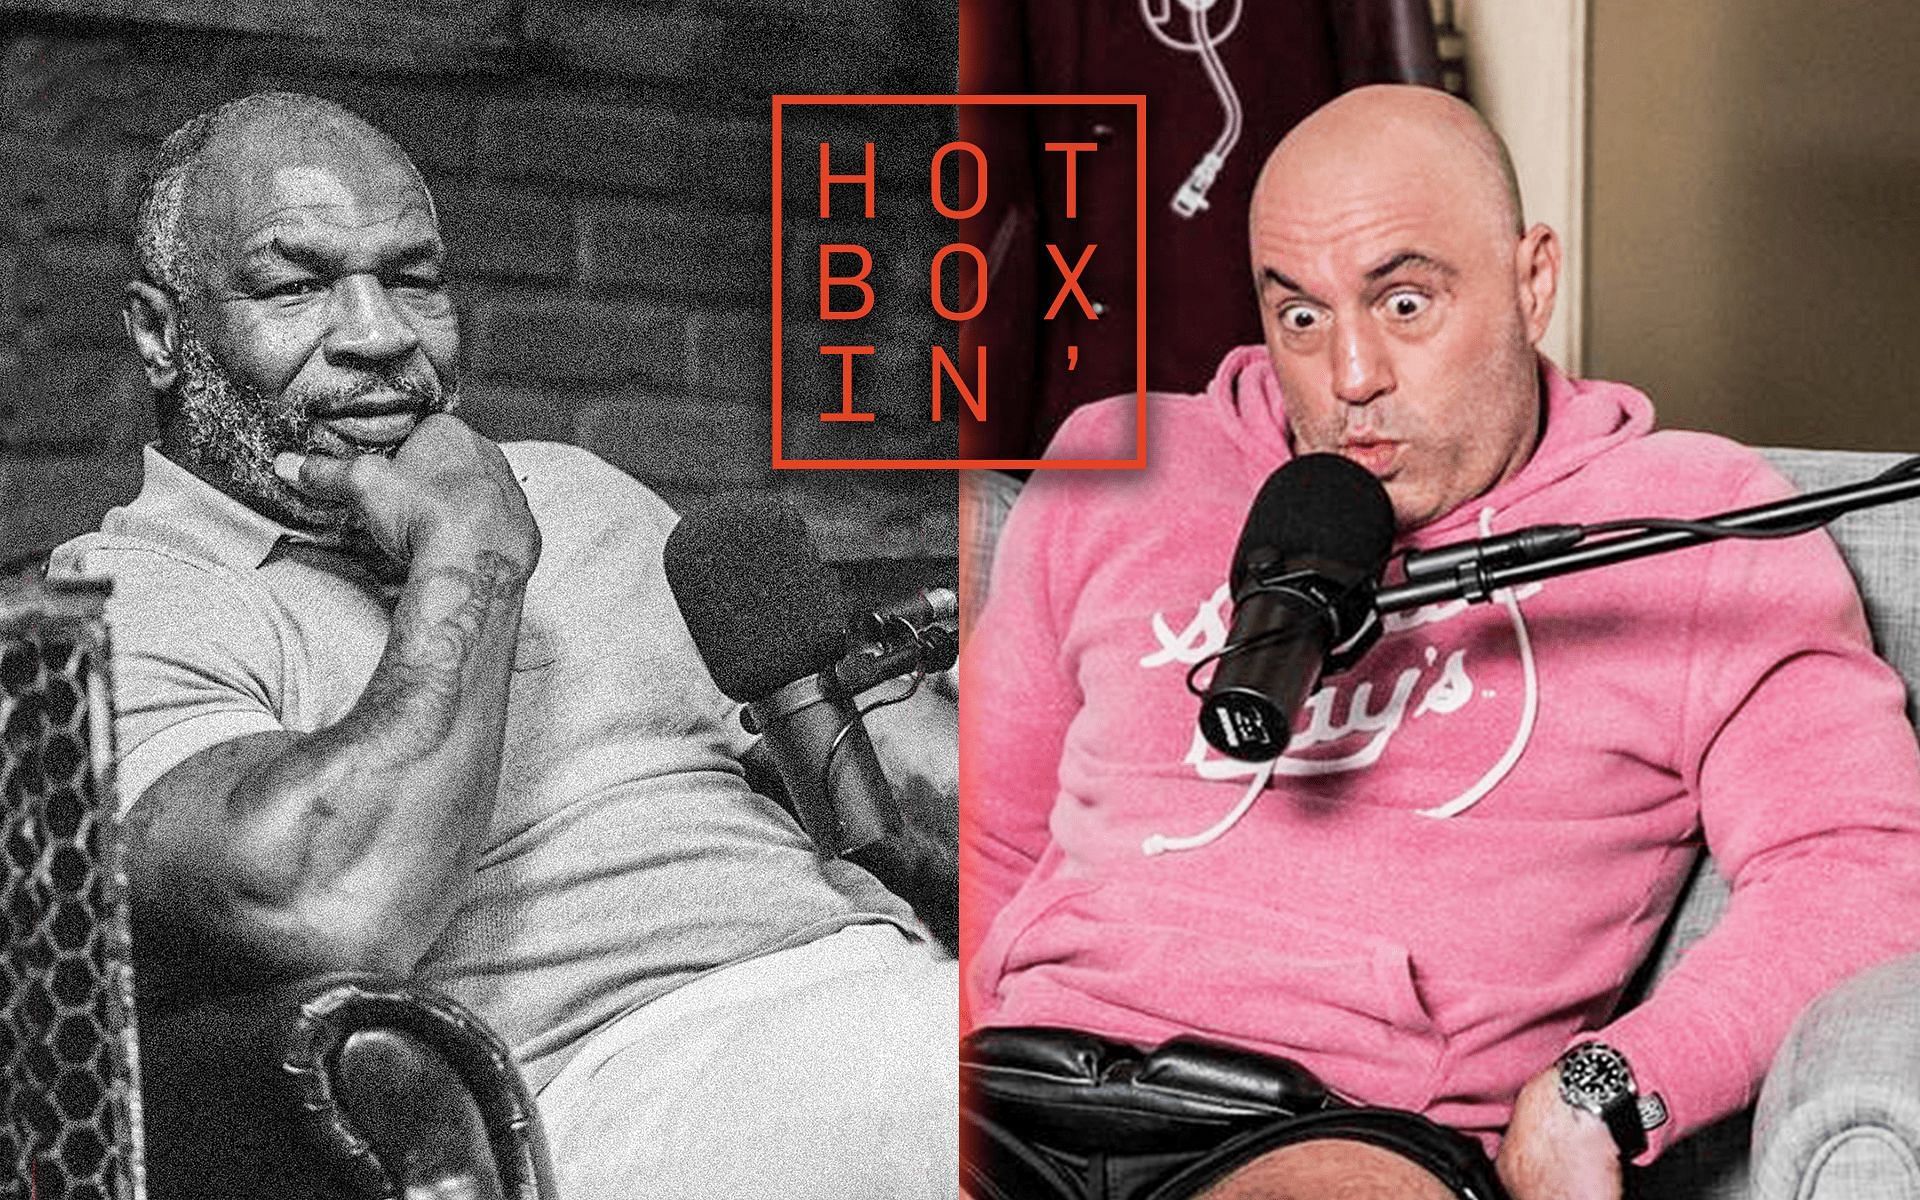 Mike Tyson (left) &amp; Joe Rogan (right) [Image Credits- @hotboxinpodcast on Instagram &amp; hotboxinpodcast.com]